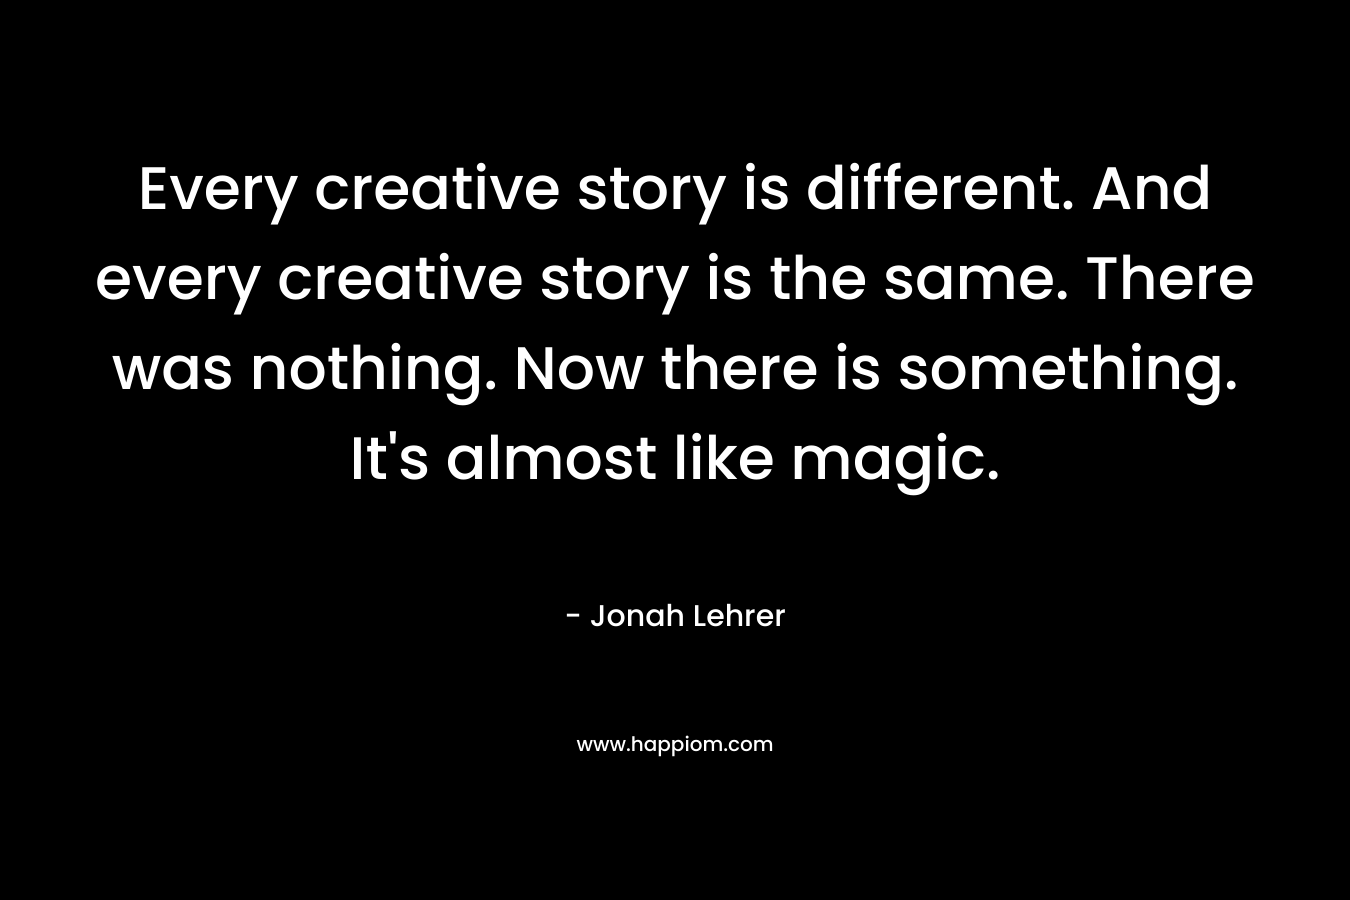 Every creative story is different. And every creative story is the same. There was nothing. Now there is something. It's almost like magic.